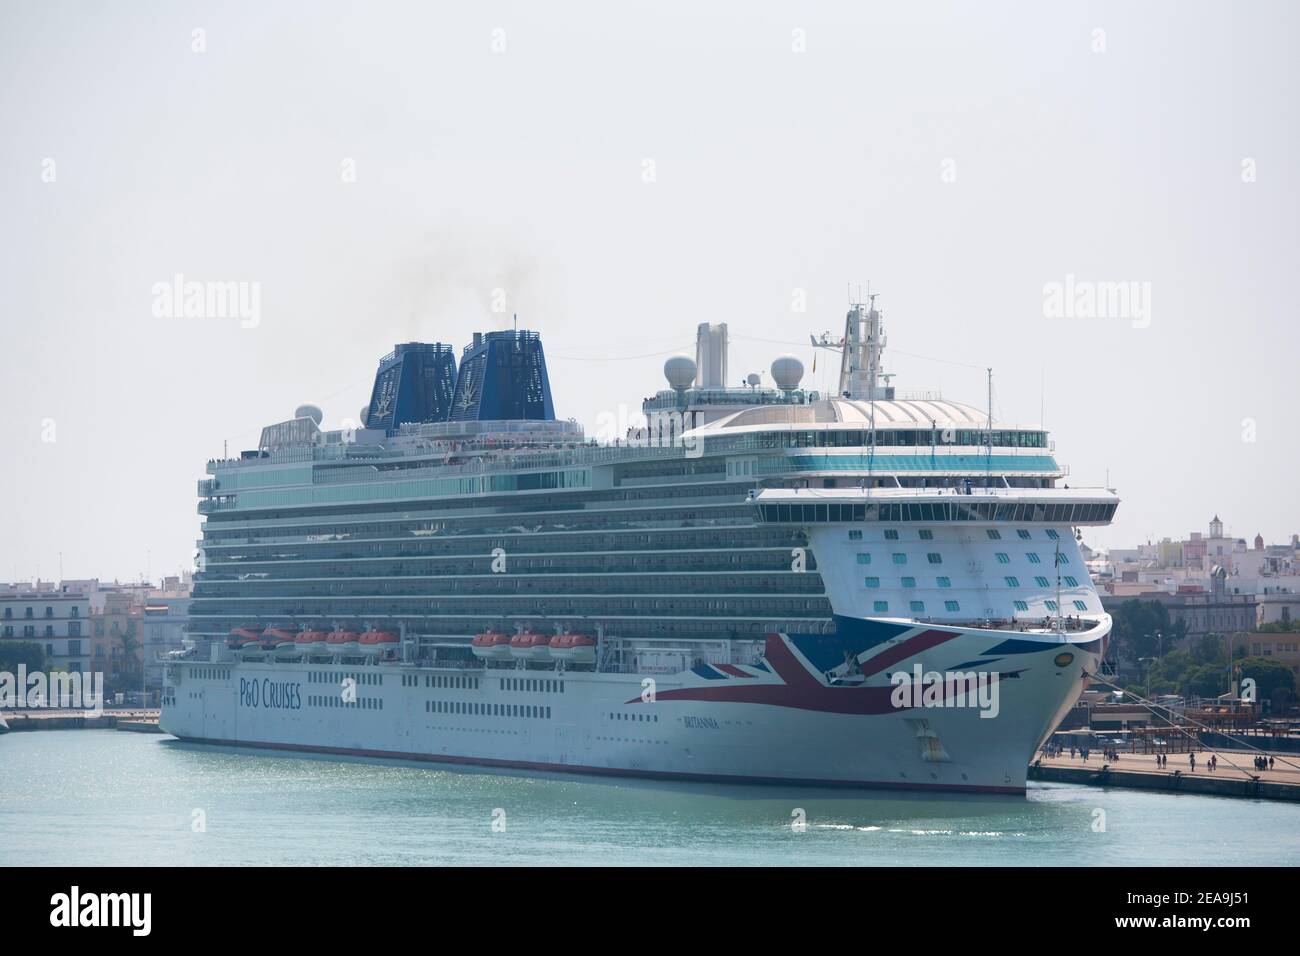 P&o Cruises Britannia High Resolution Stock Photography and Images - Alamy